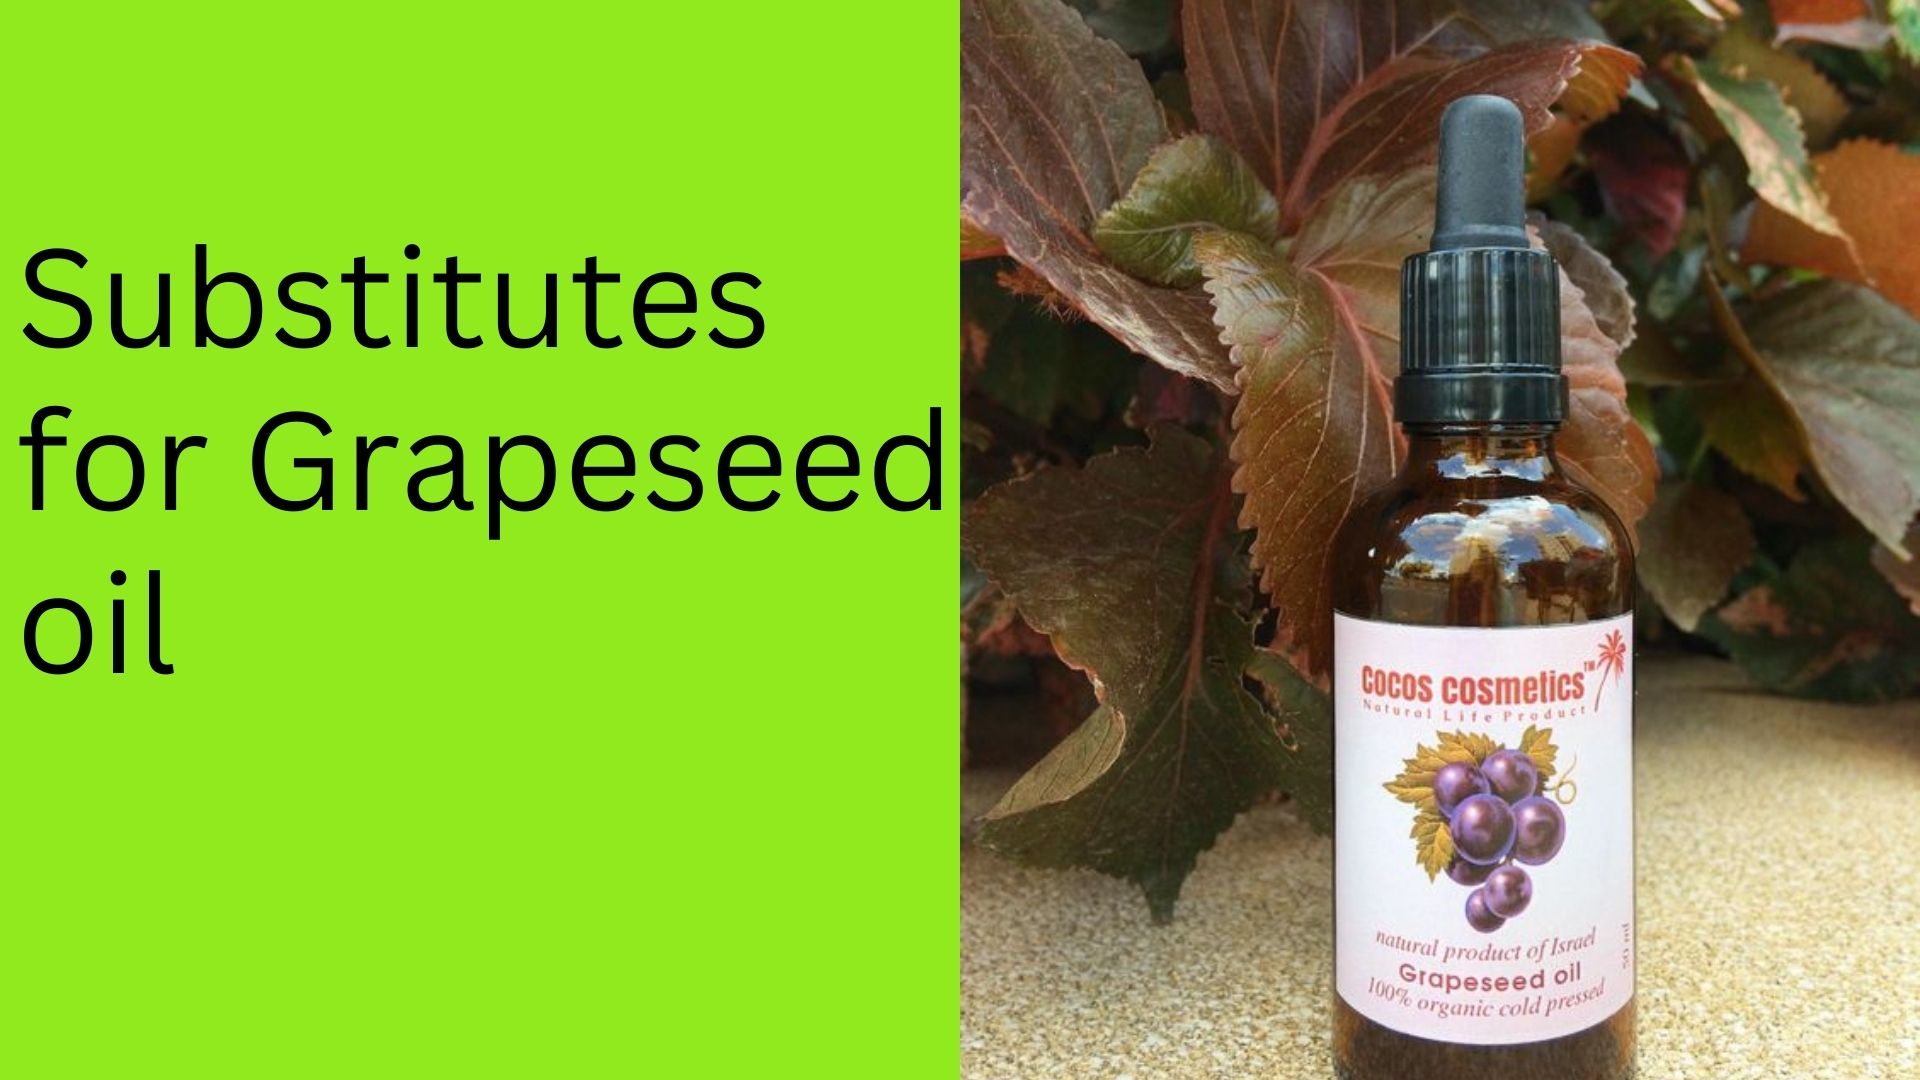 Substitutes for Grapeseed oil